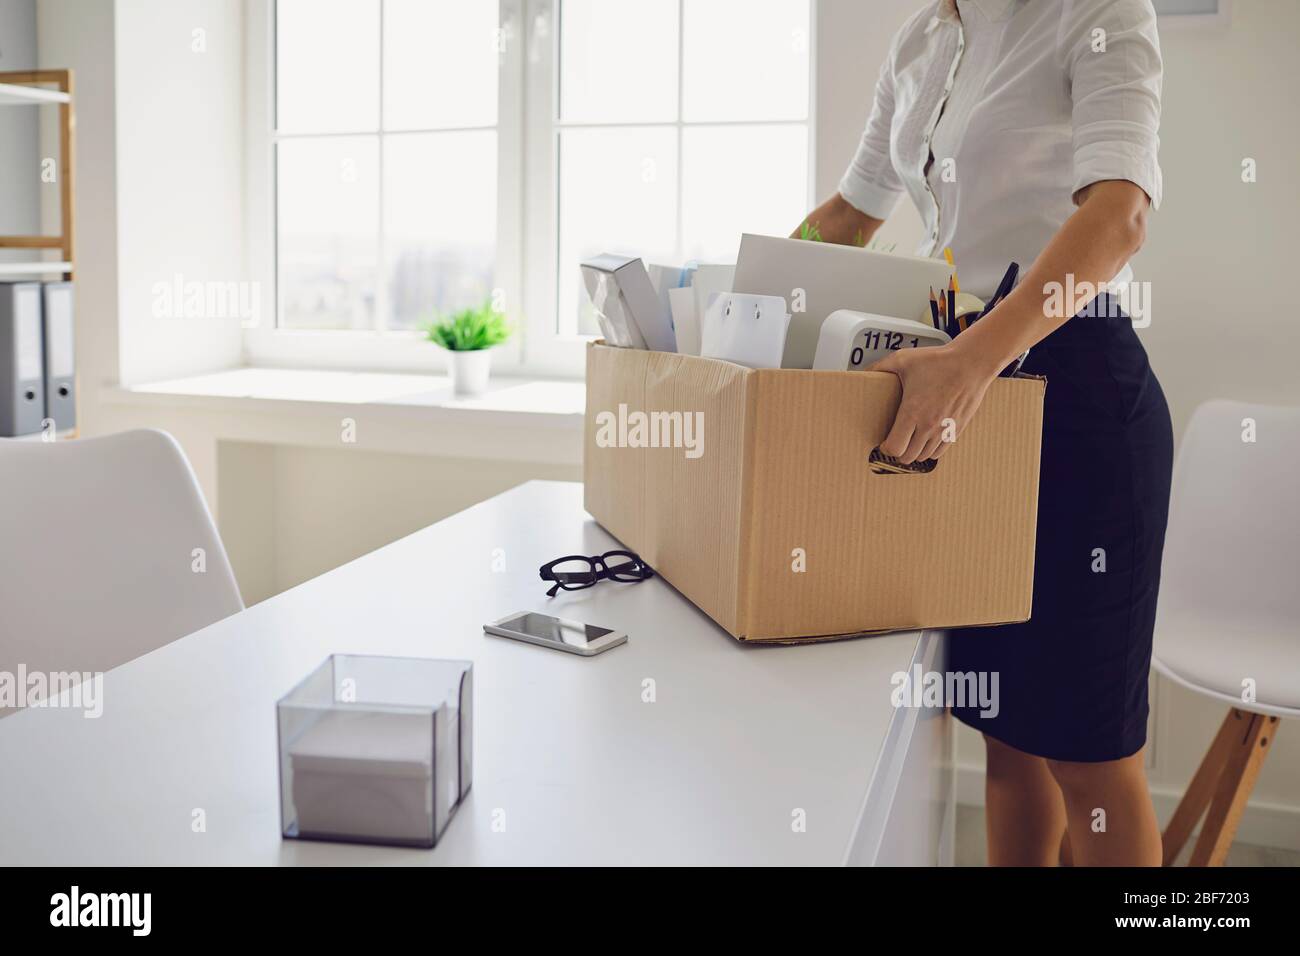 Unemployment Dismissed businesswoman upset with a cardboard box leaves the workplace from the office of the company. Stock Photo